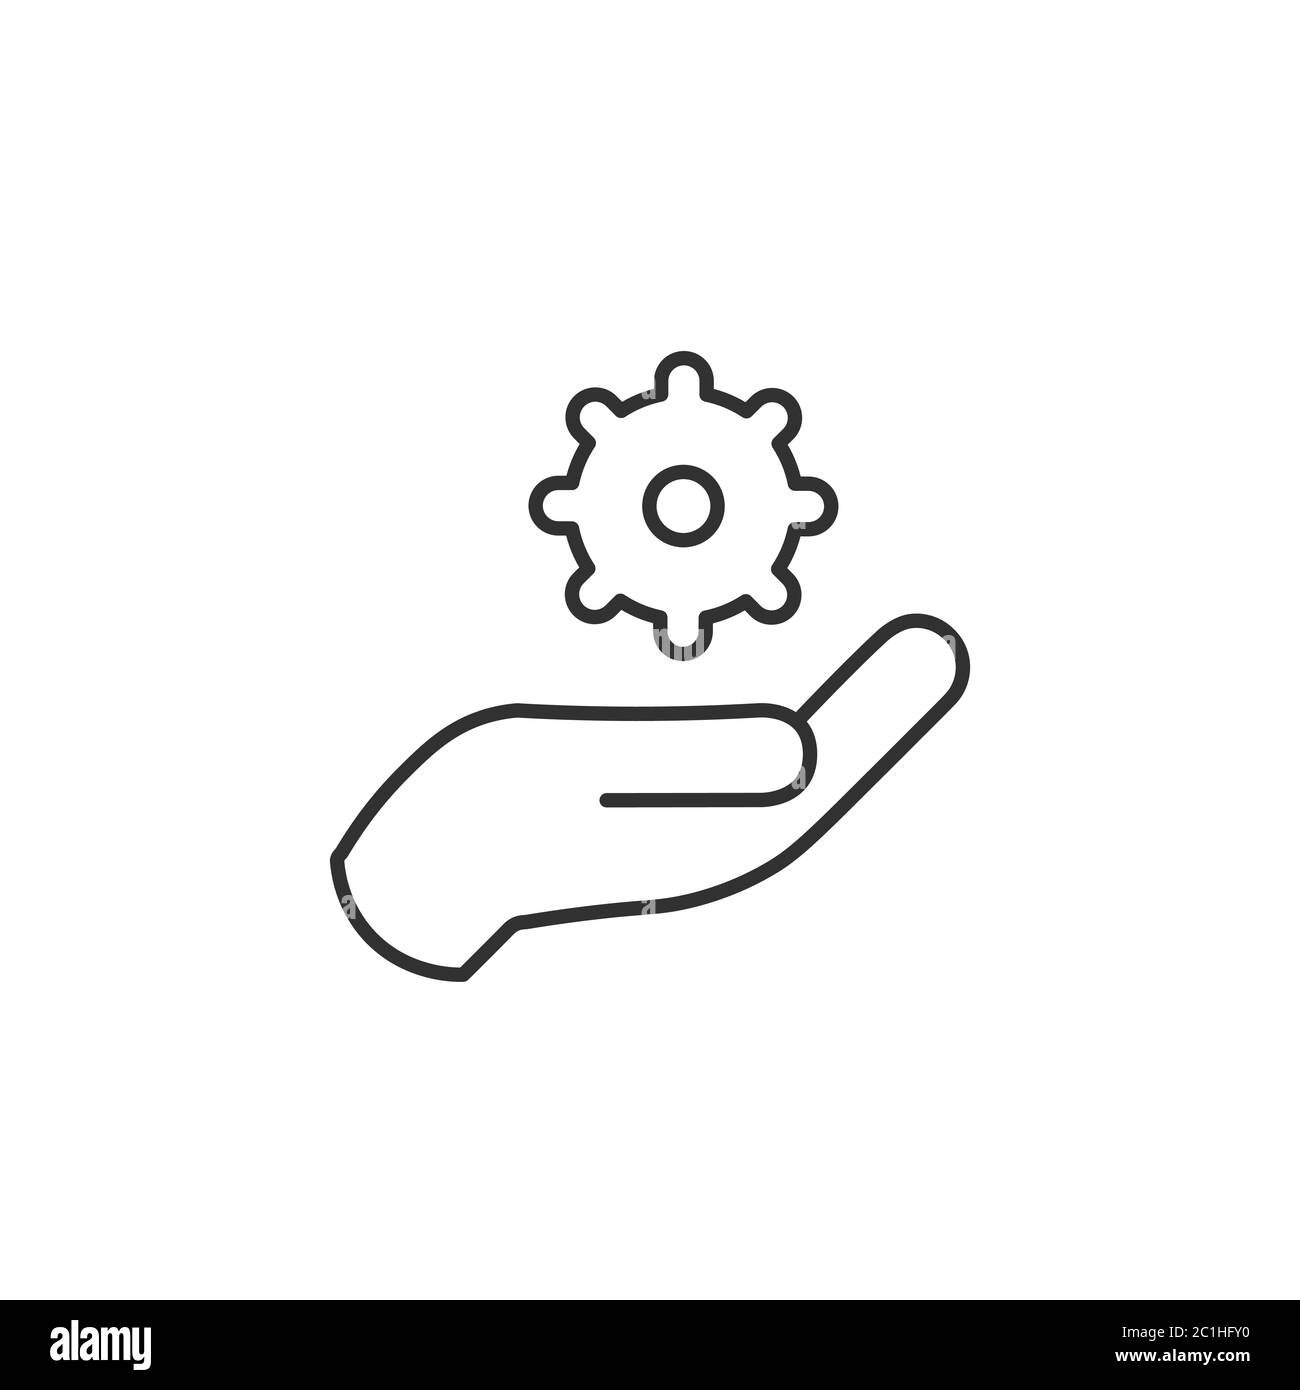 hand holding gear management concept linearicon. Stock vector illustration isolated on white background. Stock Vector